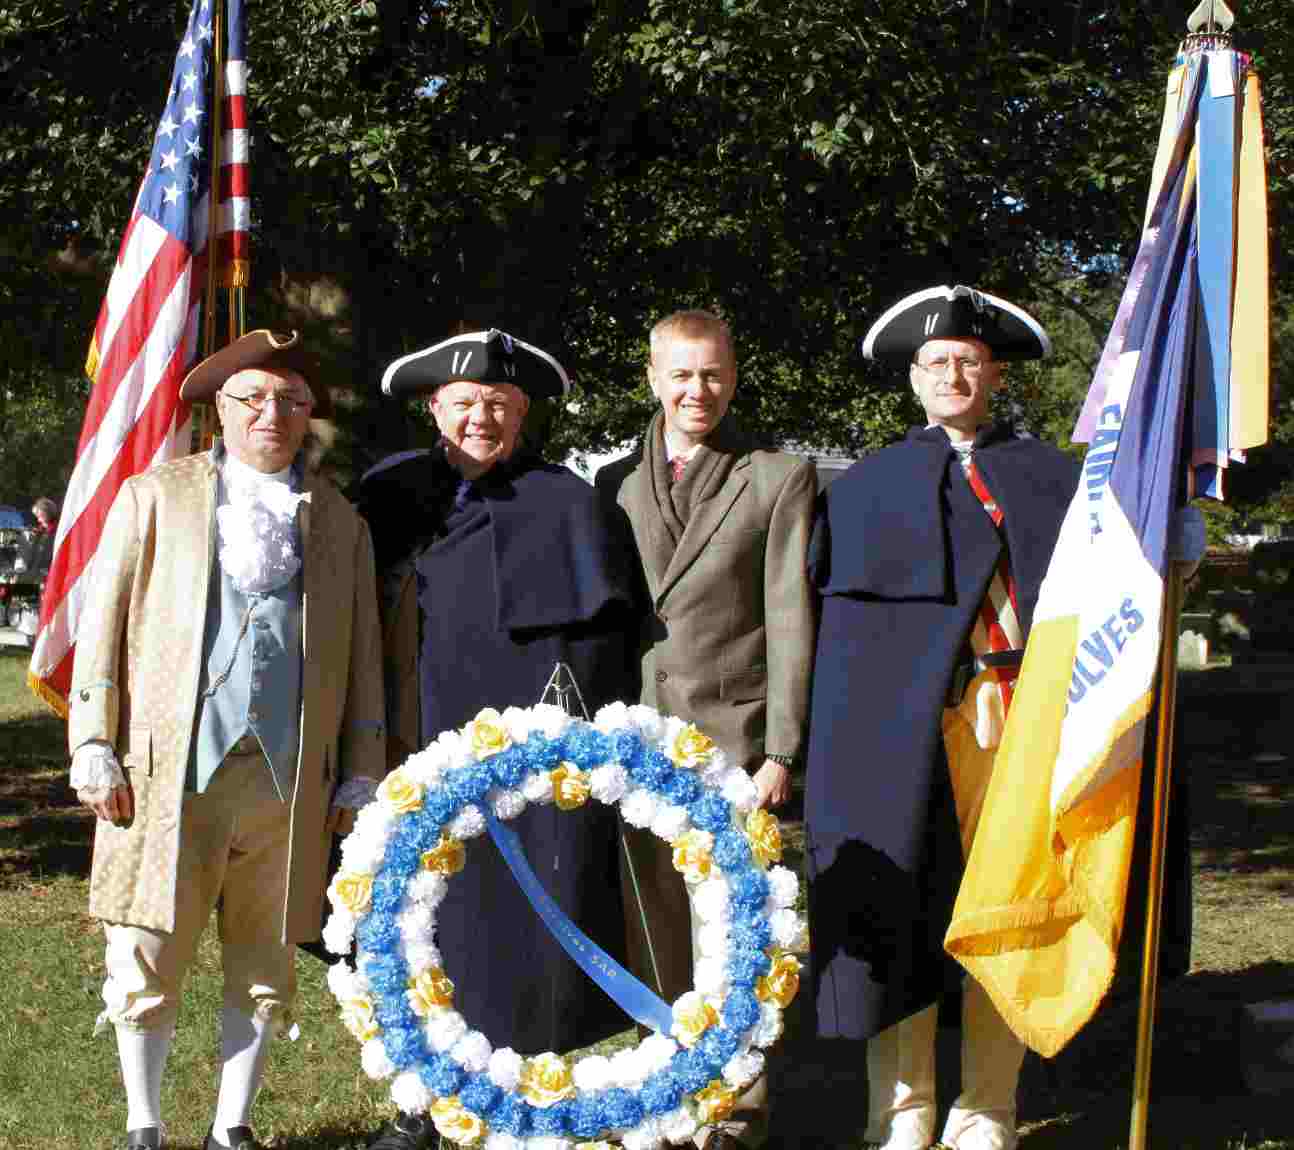 Compatriots Larry McKinley and Darrin Schmidt with two descendants of Thomas Nelson Jr.